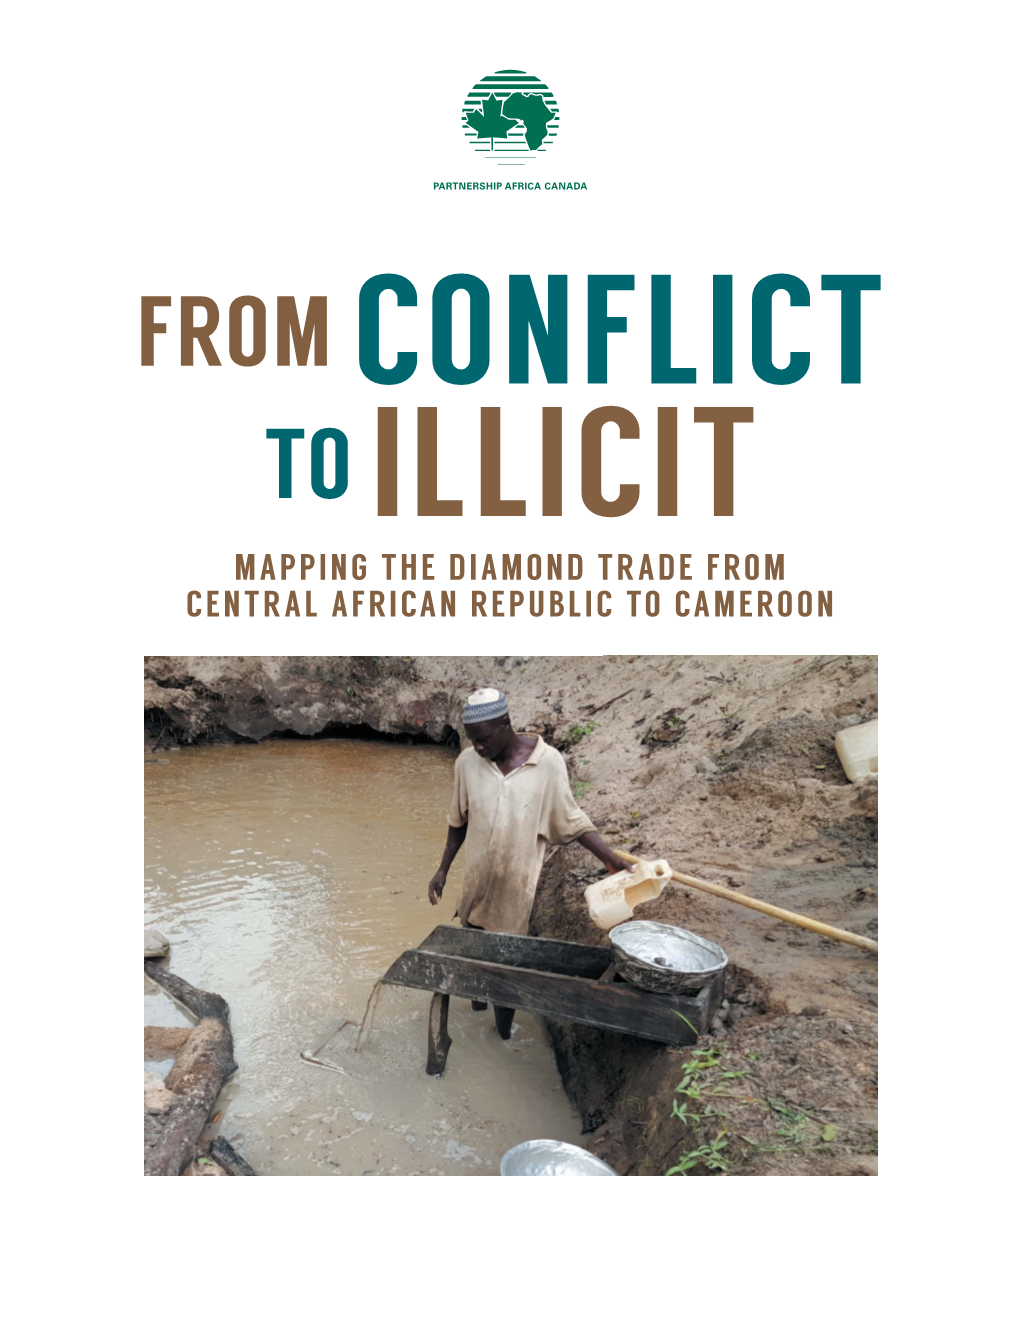 MAPPING the DIAMOND TRADE from CENTRAL AFRICAN REPUBLIC to CAMEROON from Conflict to Illicit: Mapping the Diamond Trade from Central African Republic to Cameroon